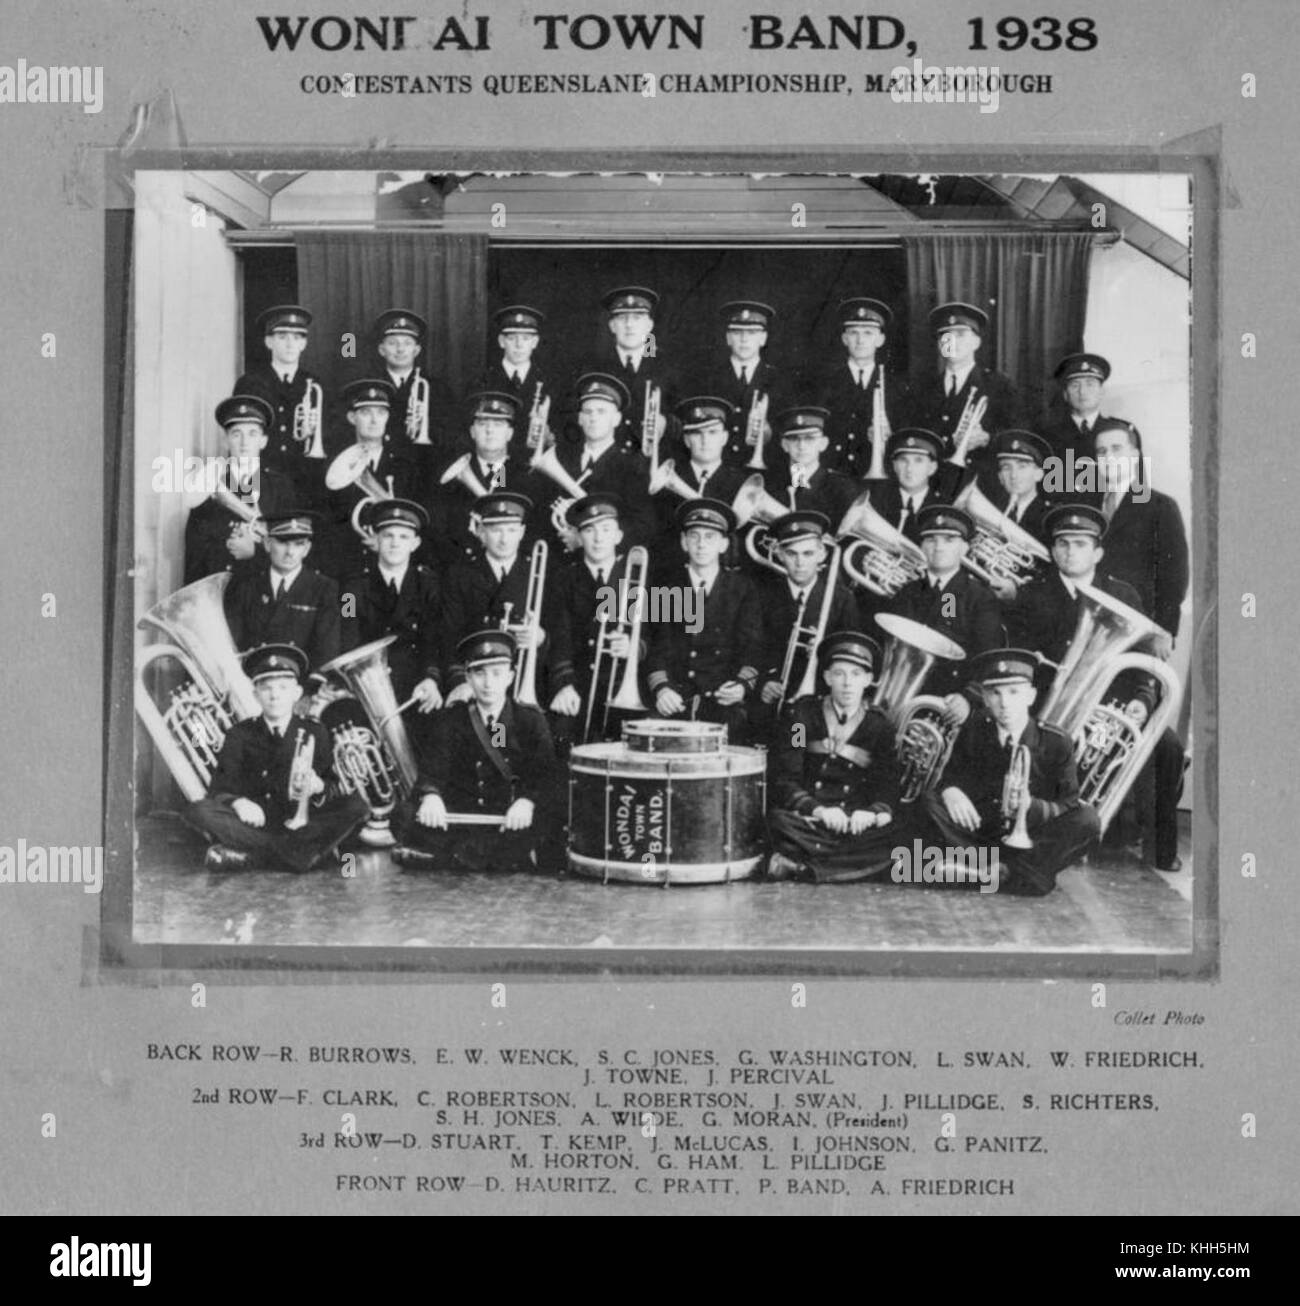 2 103602 Wondai Town Band contestants for the Queensland Championship, Maryborough, 1938 Stock Photo